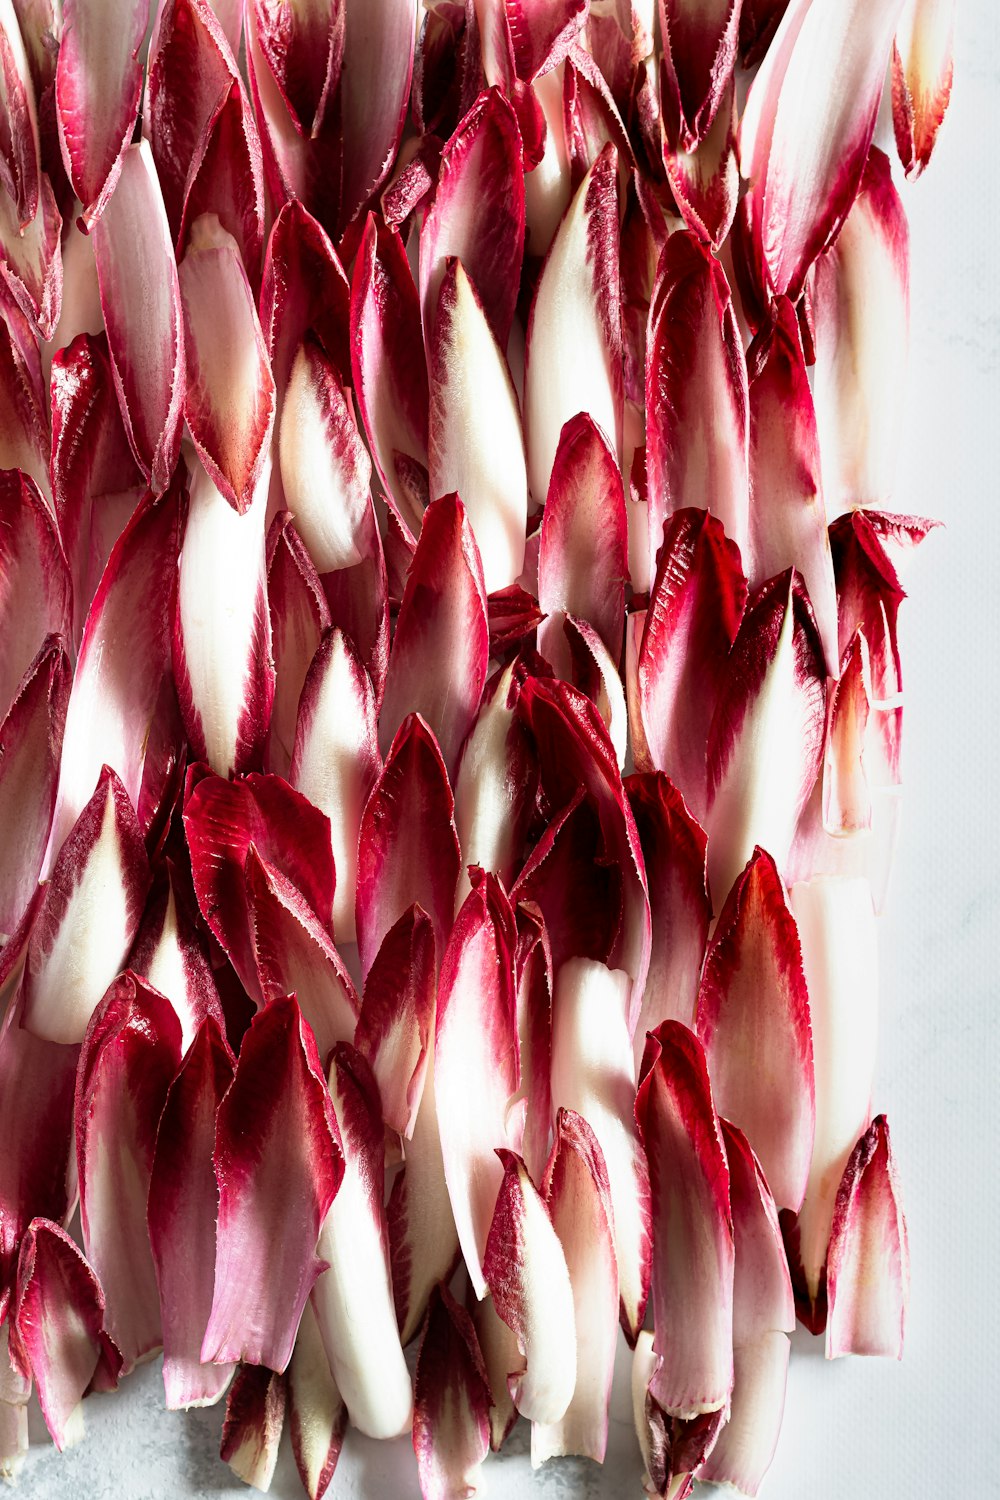 red and white plant petals